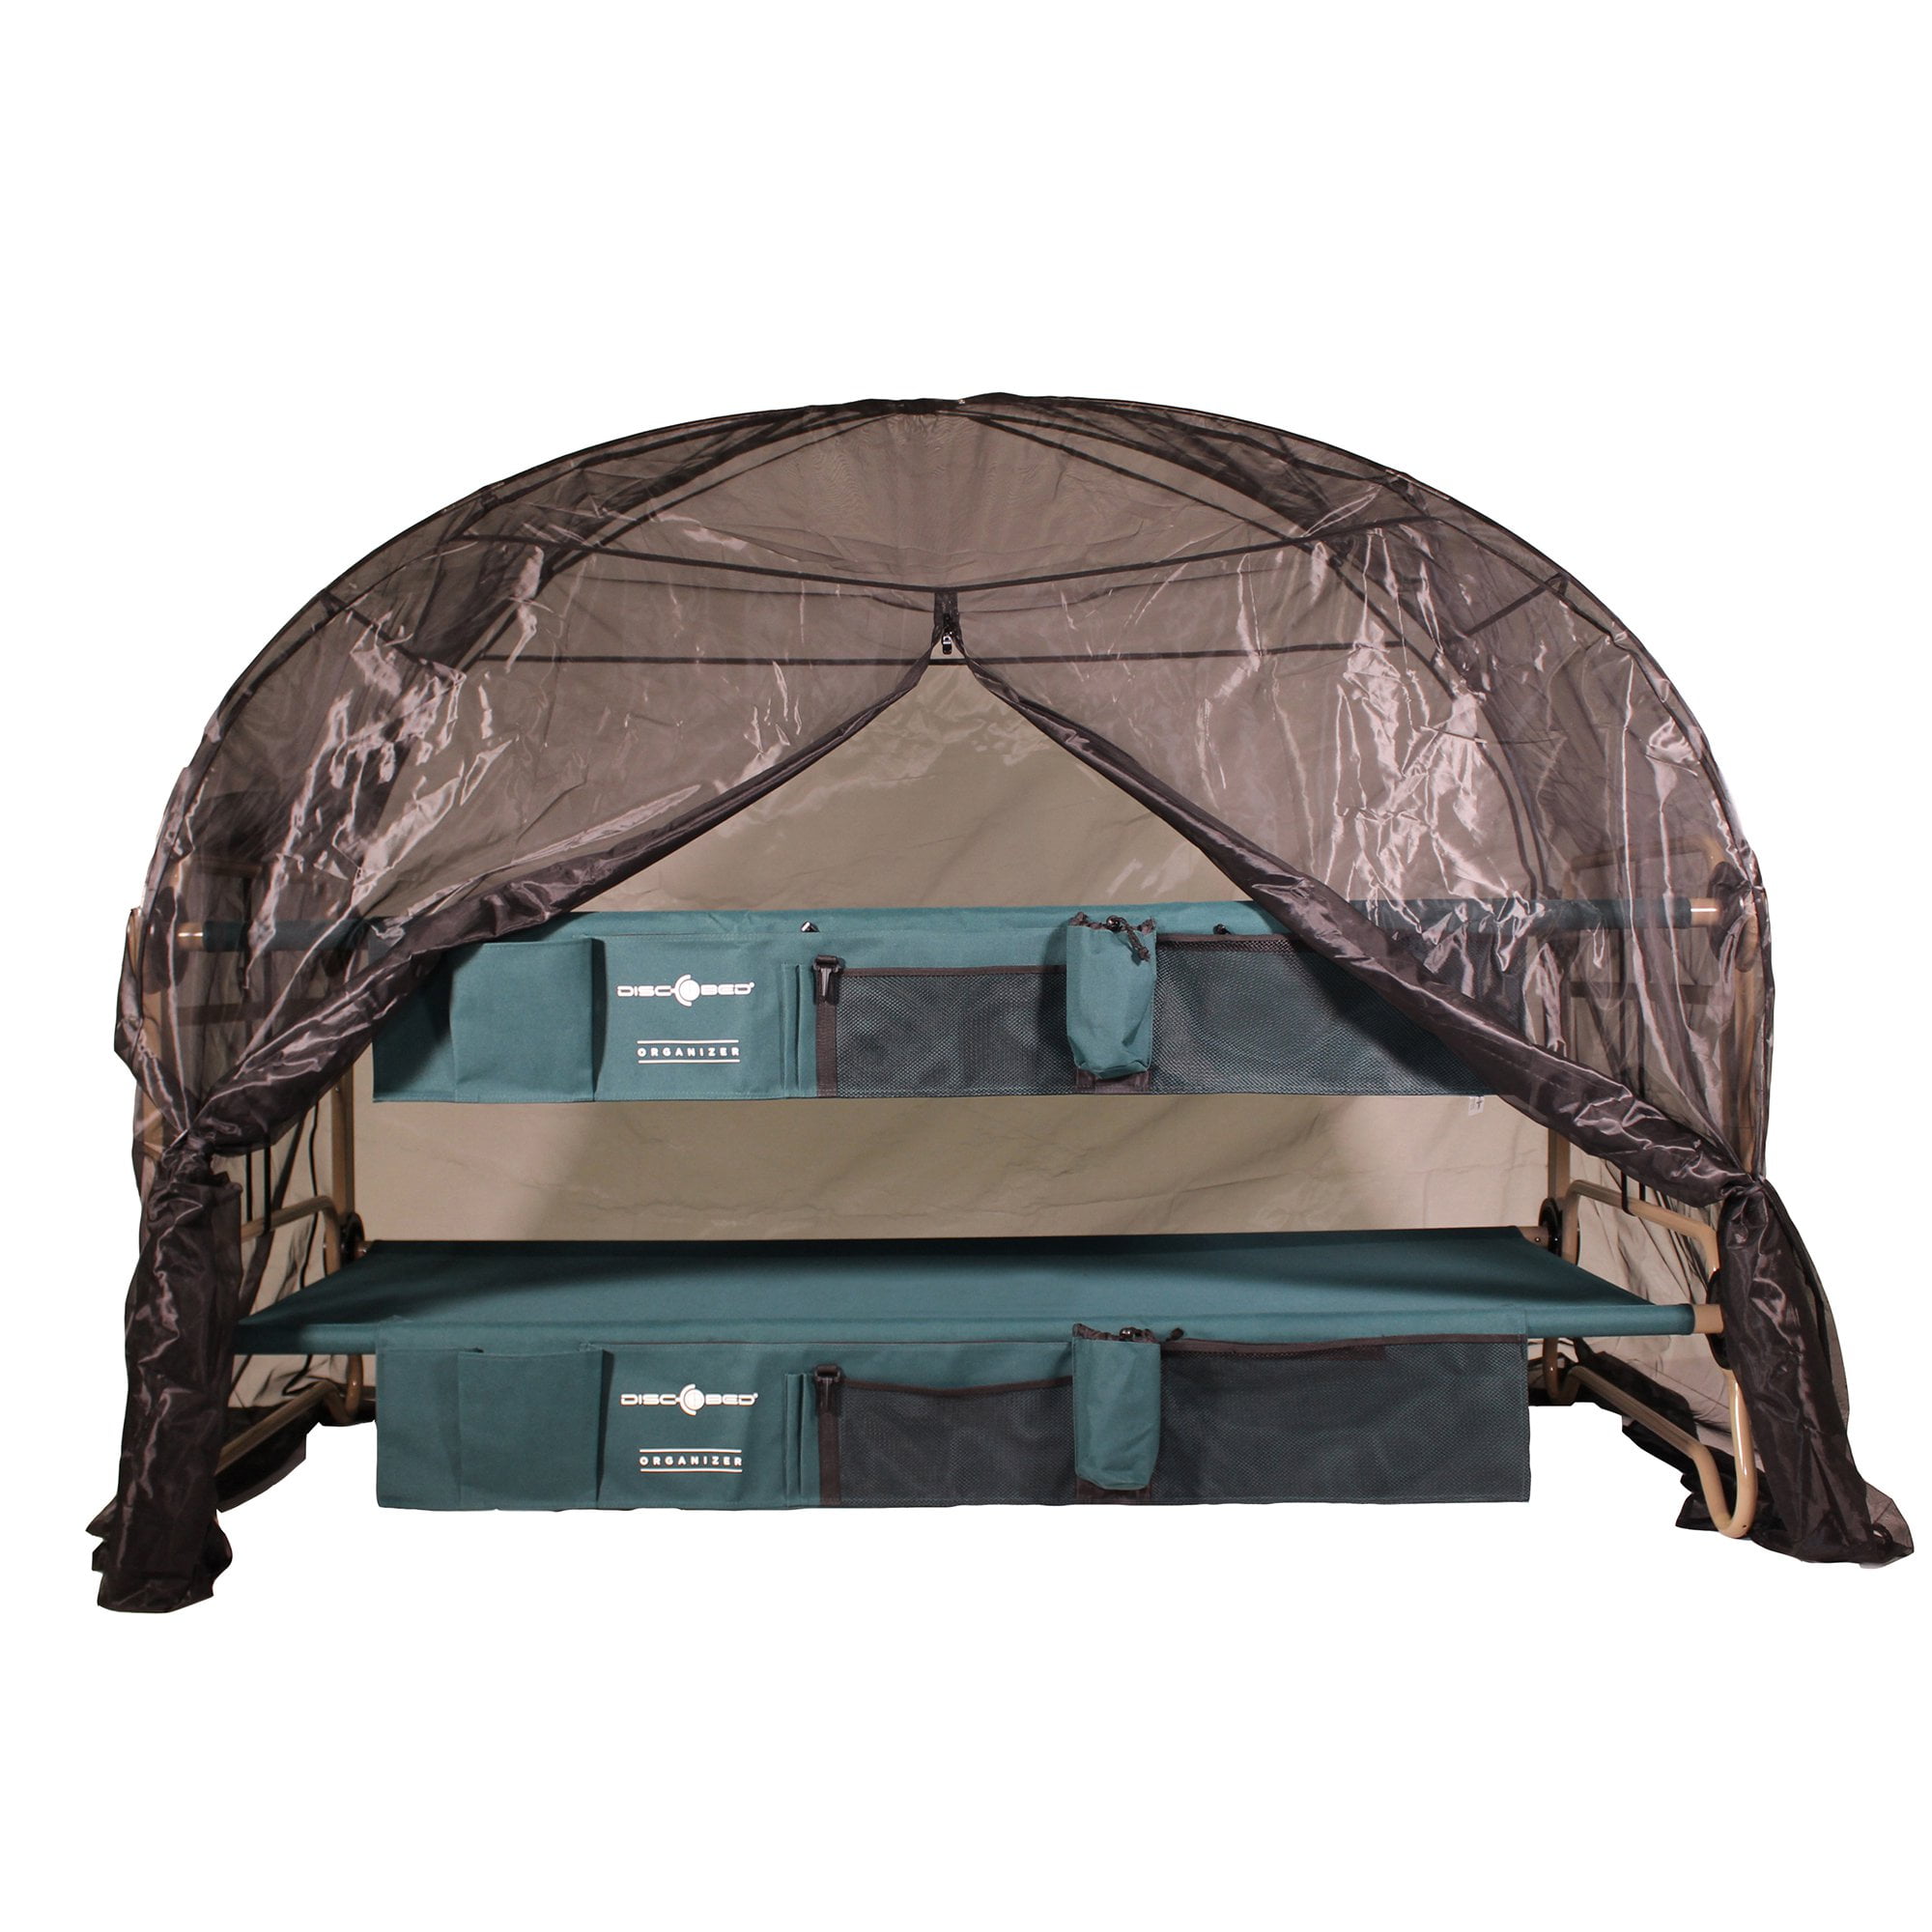 Disc O Bed Mosquito 6 X 6 Foot Net And Frame For Bunkable Camping Cot Green Walmart Com Walmart Com